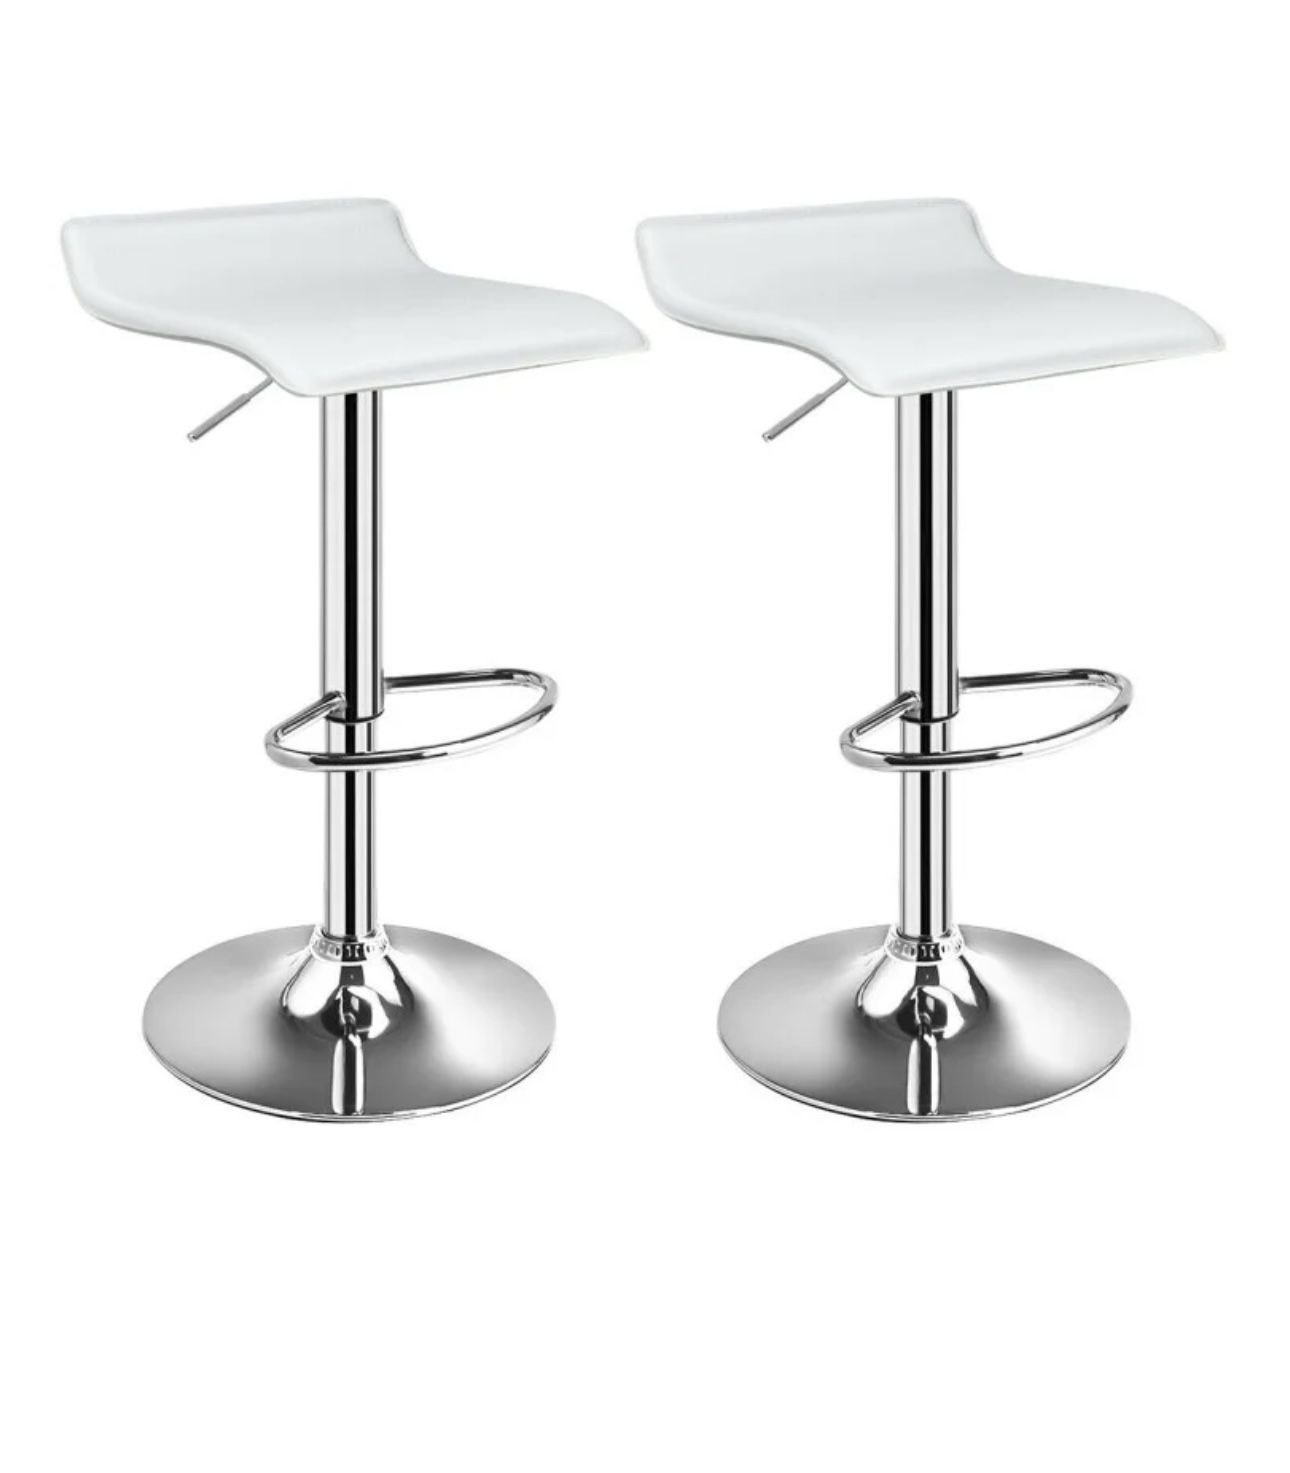 Bar Stools Set of 2 Height Adjustable Backless Barstools Modern PU Leather Bar Chairs with Chrome Base for Kitchen Island Pub